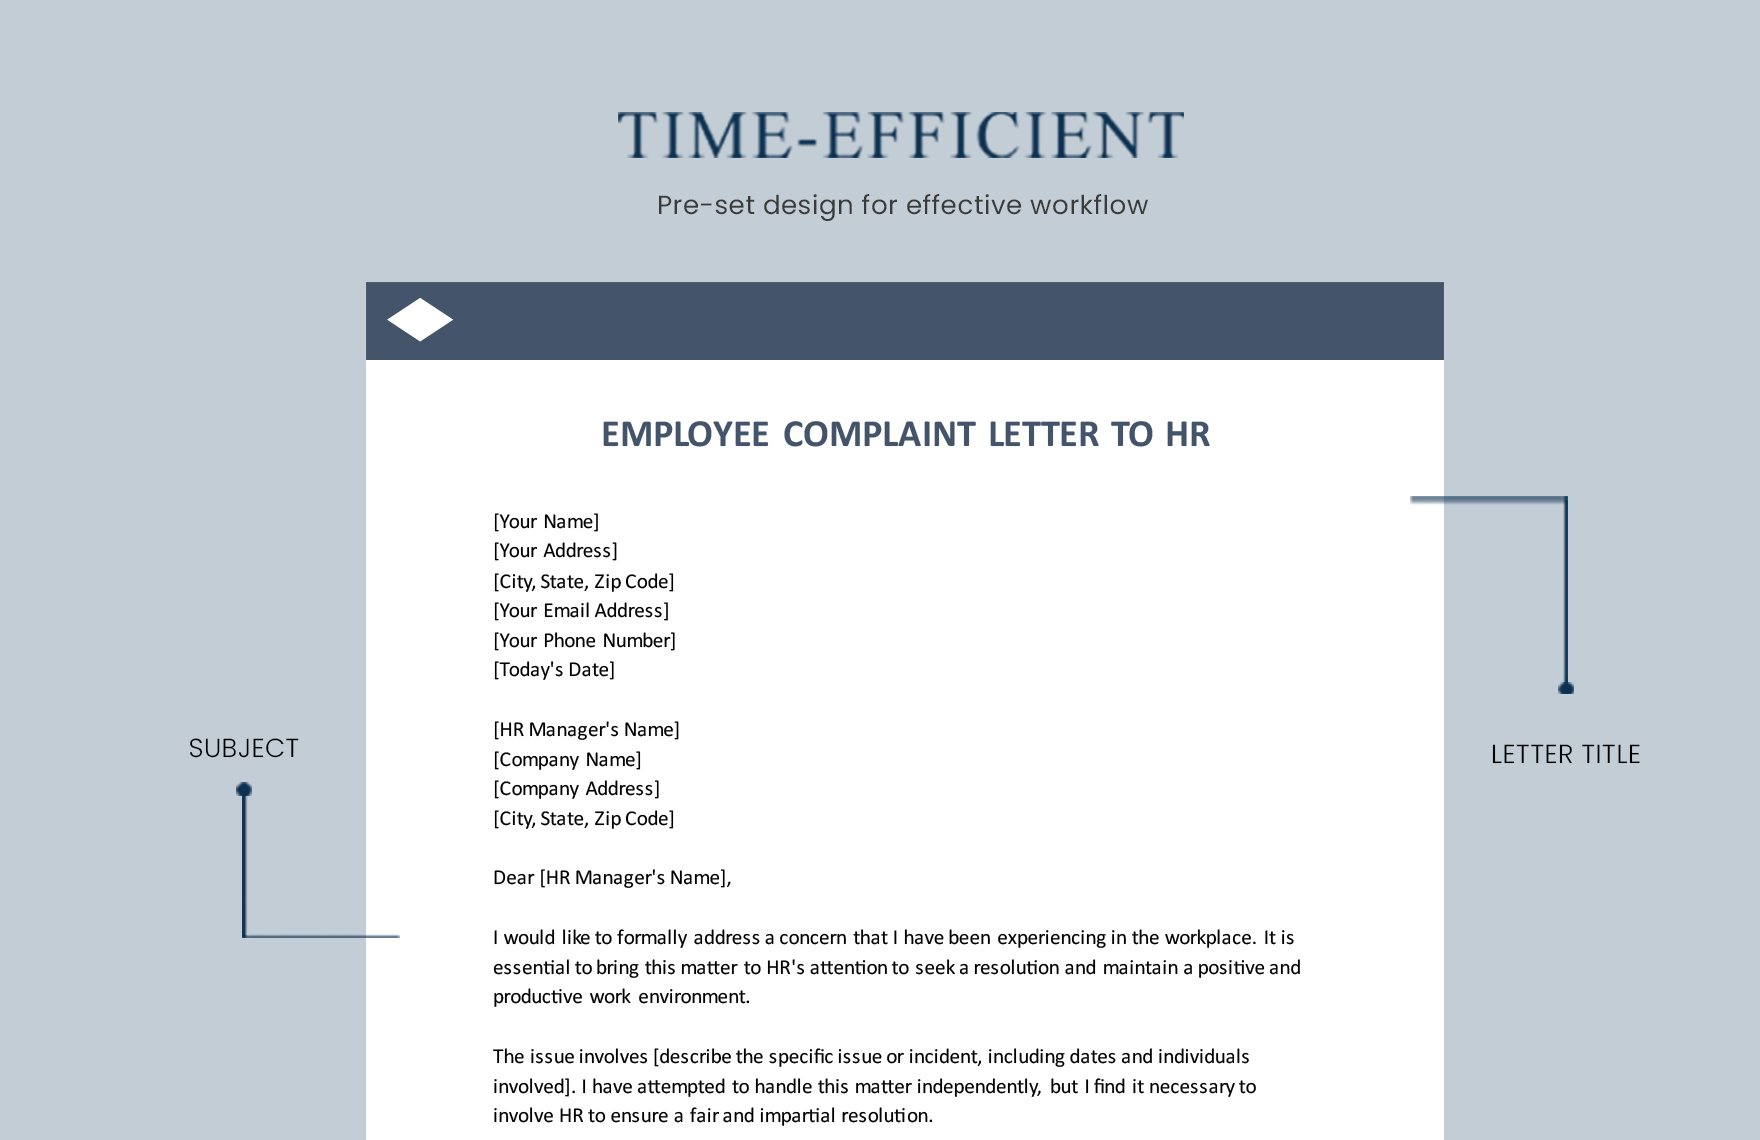 Employee Complaint Letter To Hr